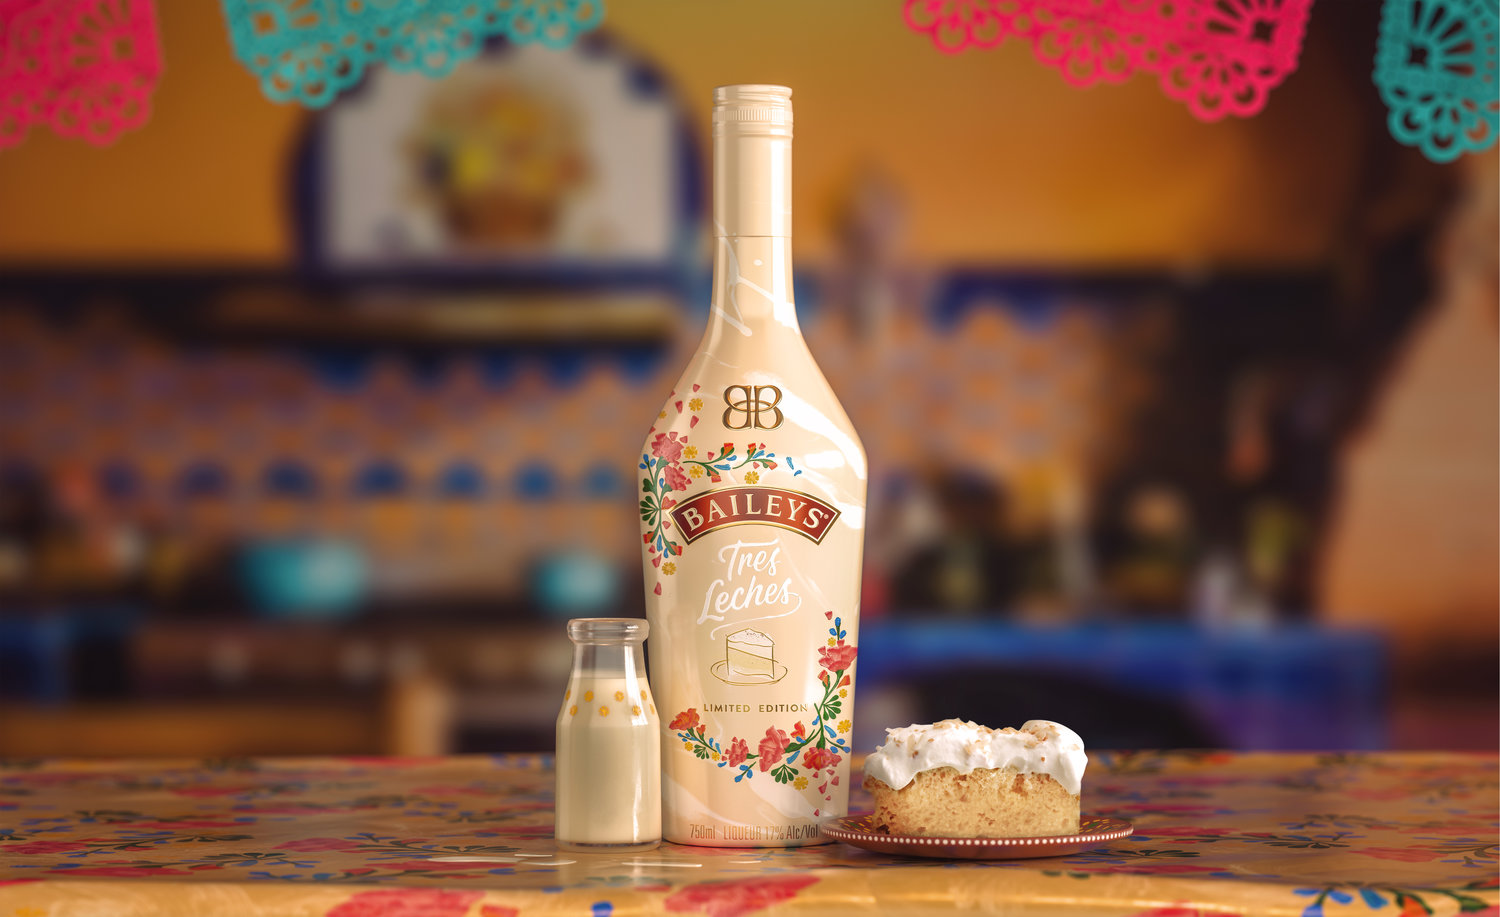 Baileys Tres Leches Launches With Latin American Inspired Packaging Design by Vault49